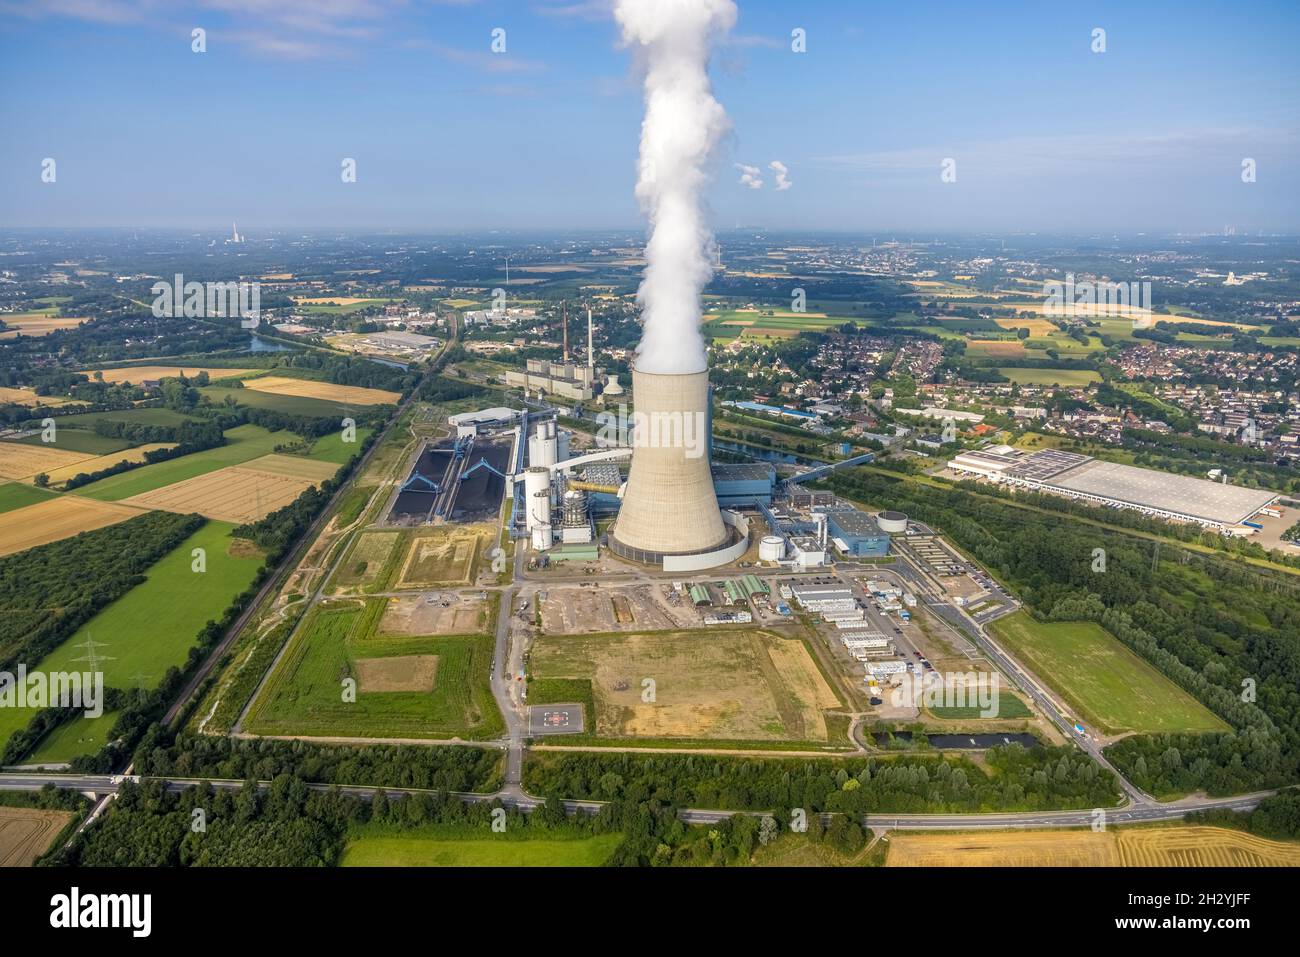 Aerial view of the power plant facilities and exhaust towers of the coal-fired combined heat and power plant Datteln 4 Uniper Kraftwerk Im Löringhof a Stock Photo